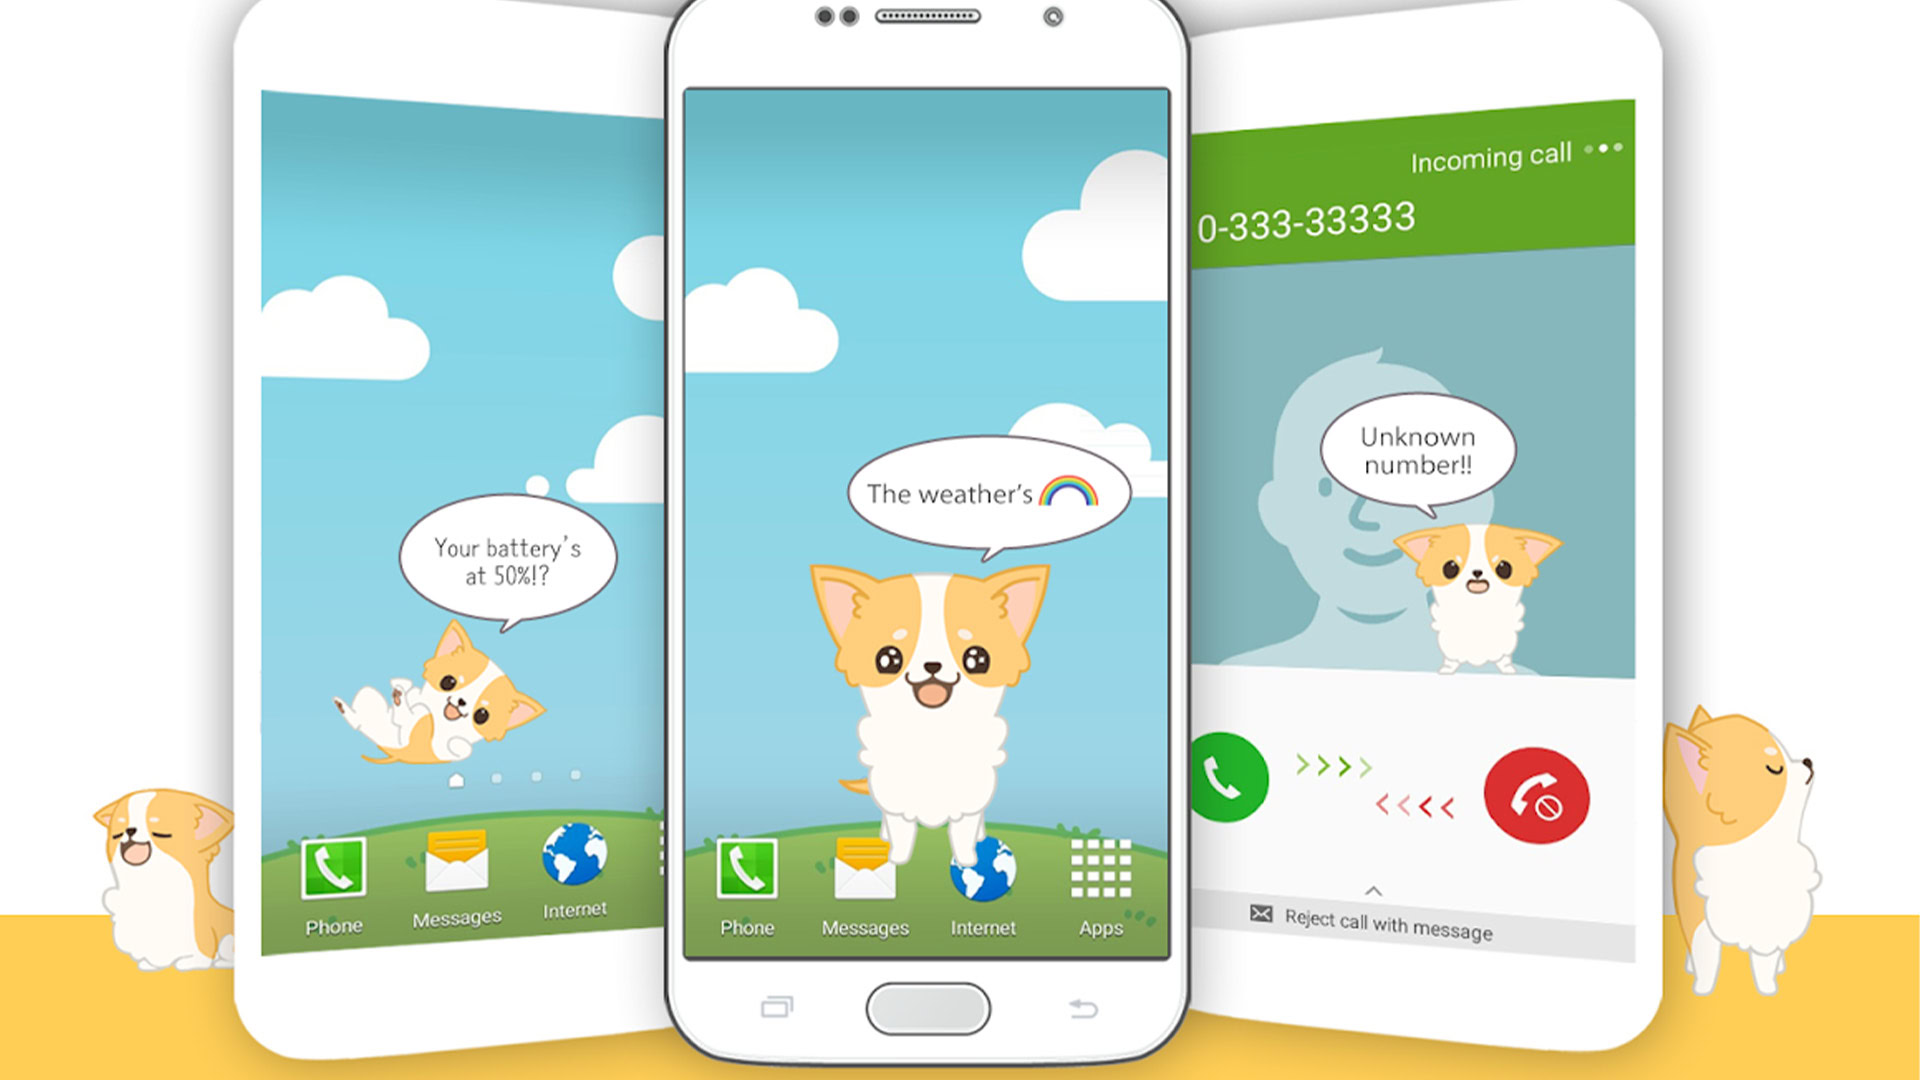 https://www.androidauthority.com/wp-content/uploads/2019/04/Hellopet-best-virtual-pet-apps-and-games.jpg